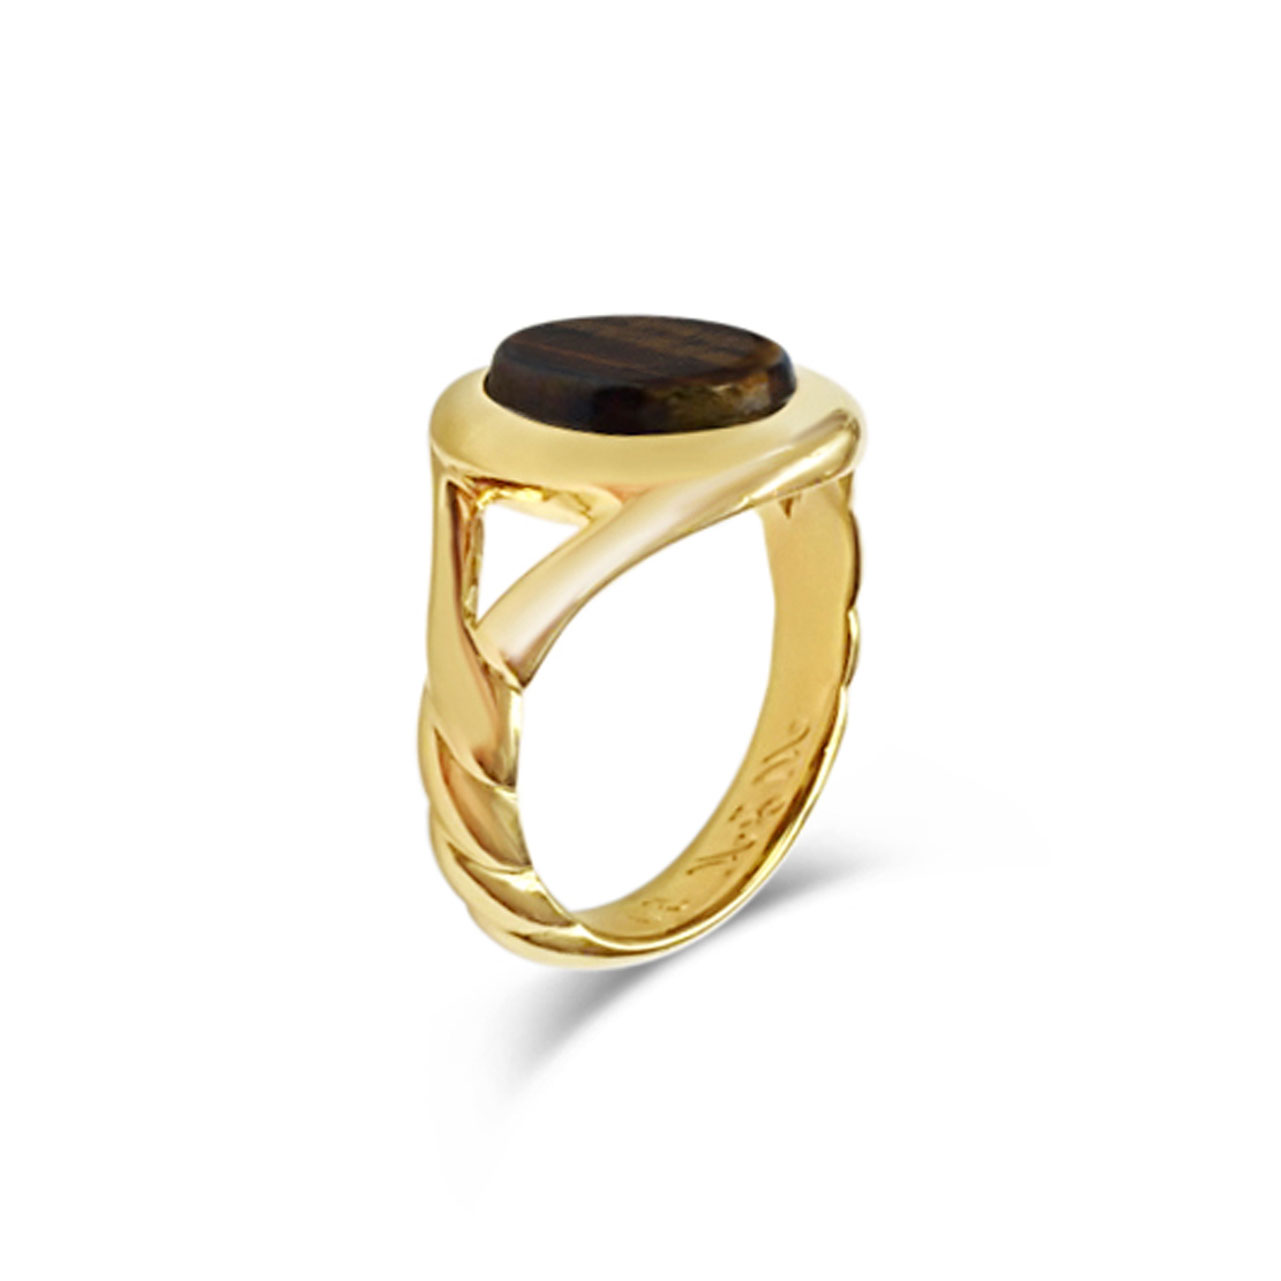 Tiger's eye and yellow gold signet ring side